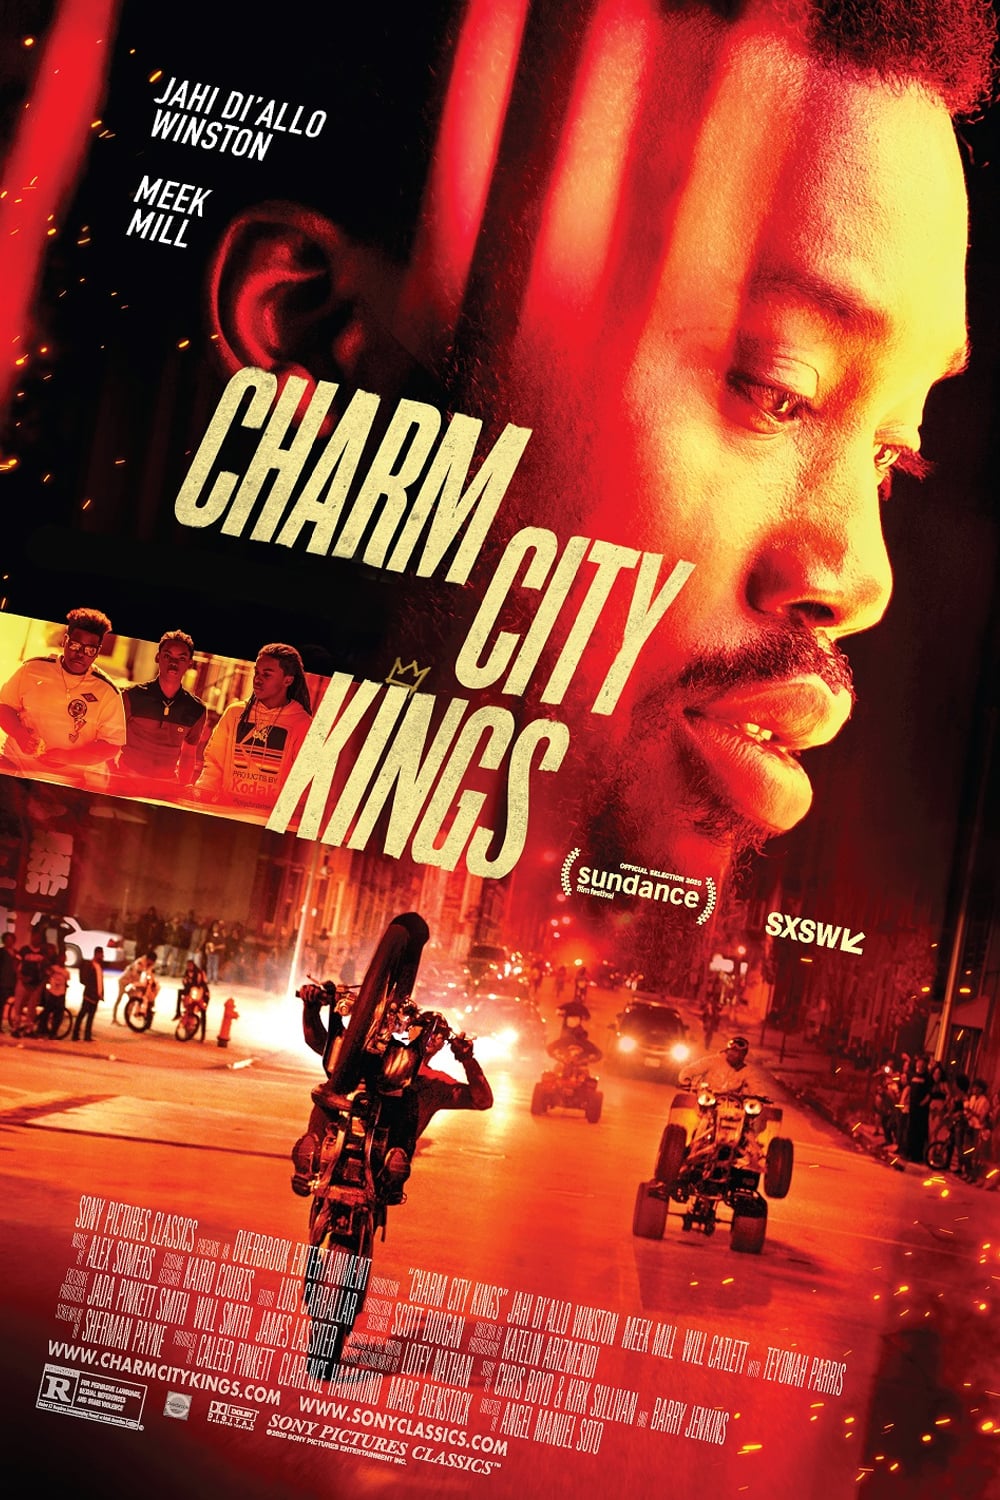 Charm City Kings Trailer on Hbo Max